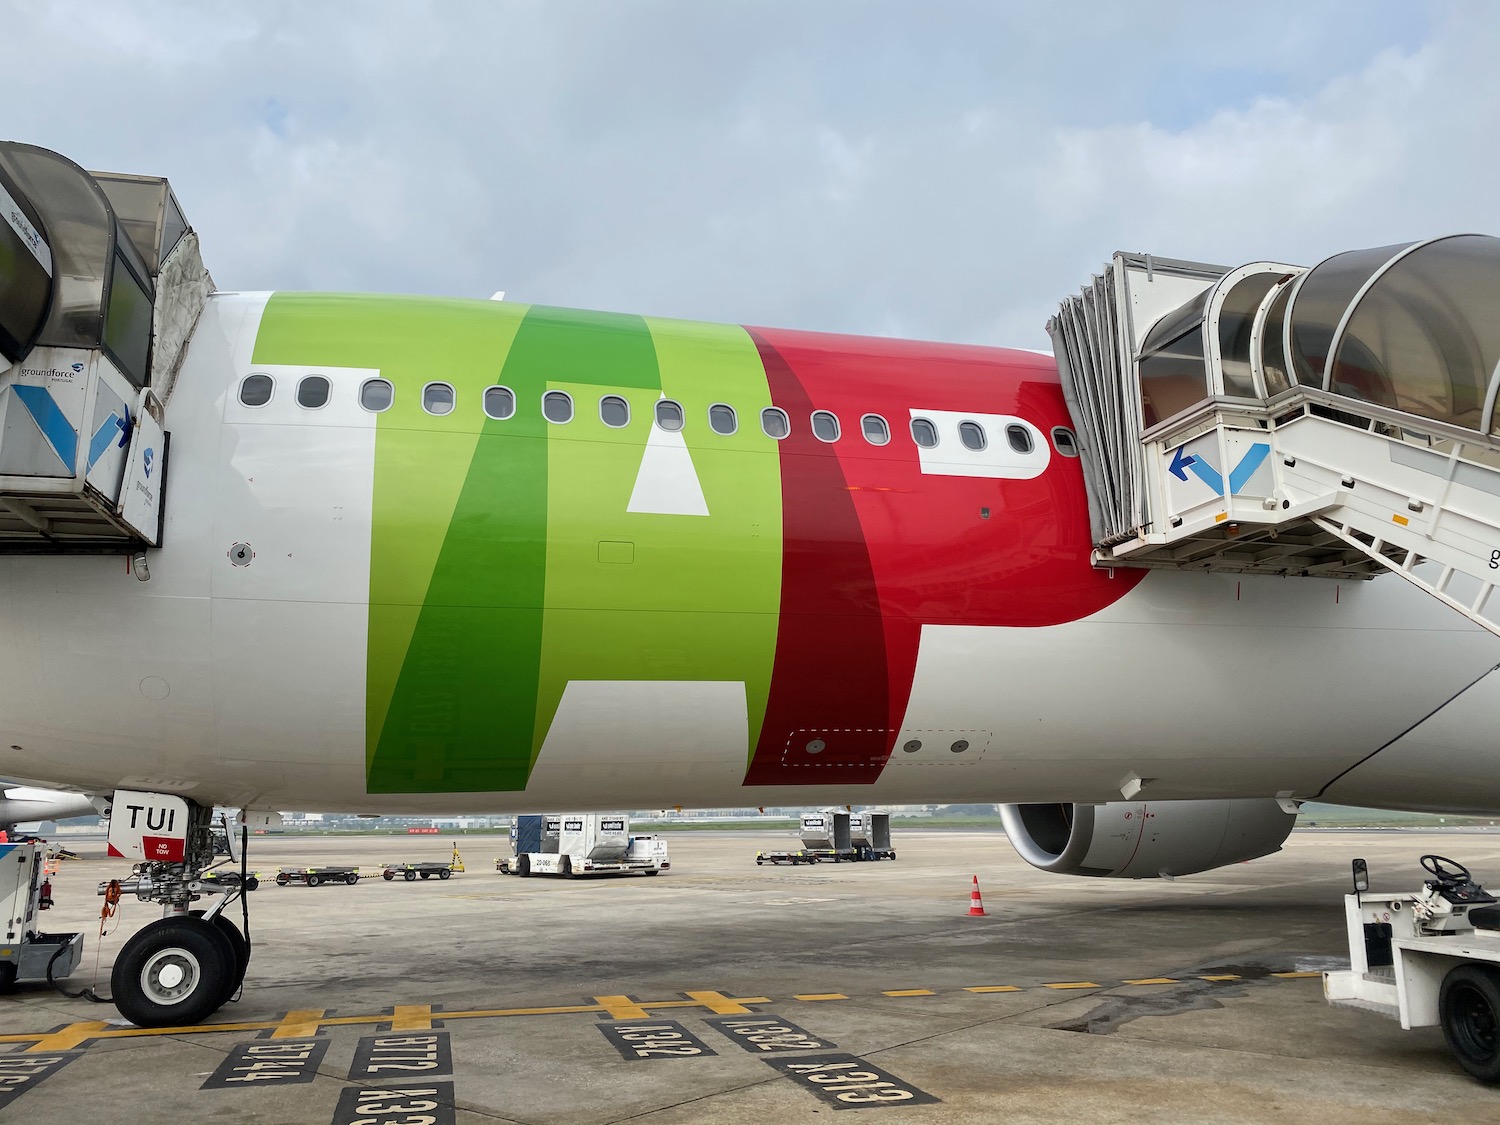 a large airplane with a green and red stripe